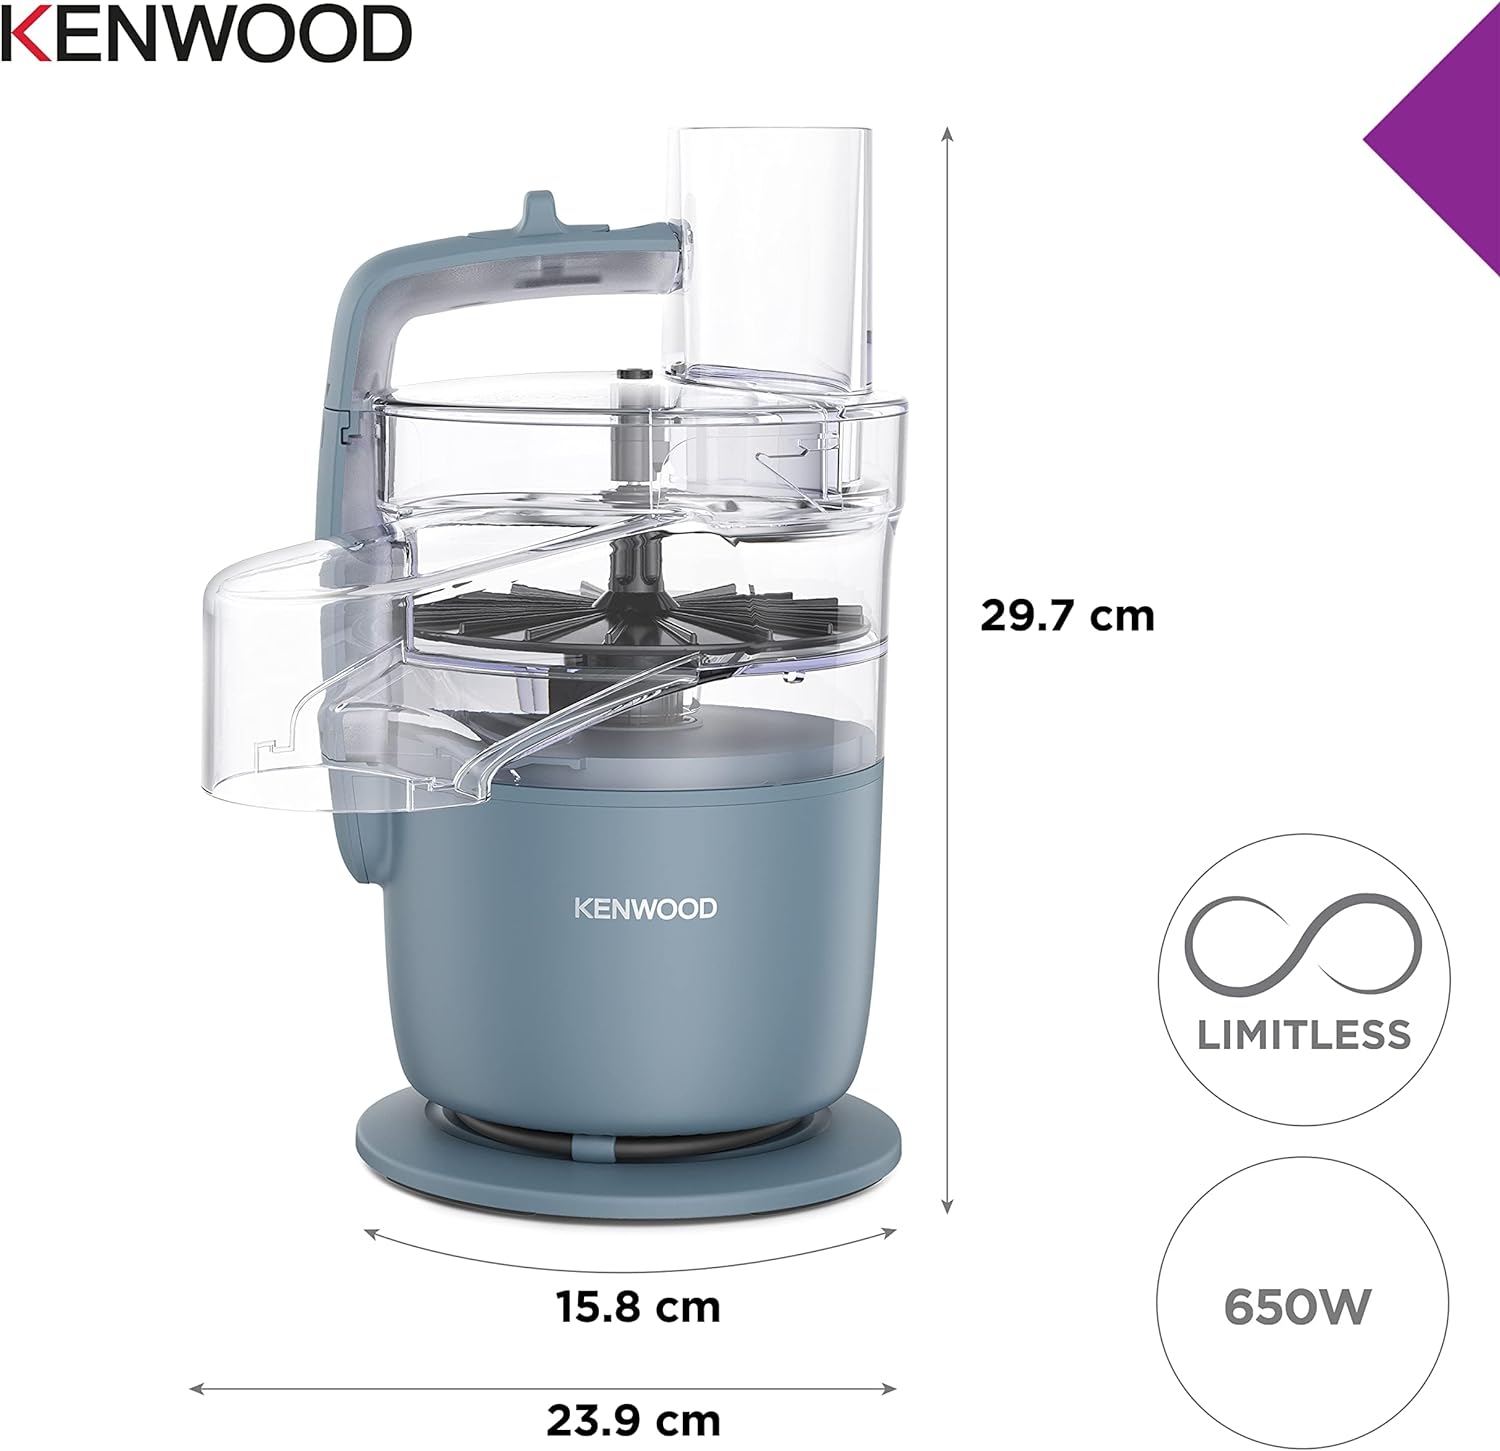 Kenwood, MultiPro Go FDP22.130GY, Food Processor, for Chopping, Slicing, Grating, Pureeing and Kneading Dough, with Express Serve, 1.3L Bowl, Knife blade, 4mm Slicing/Grating Disk, 650 Watts, Grey